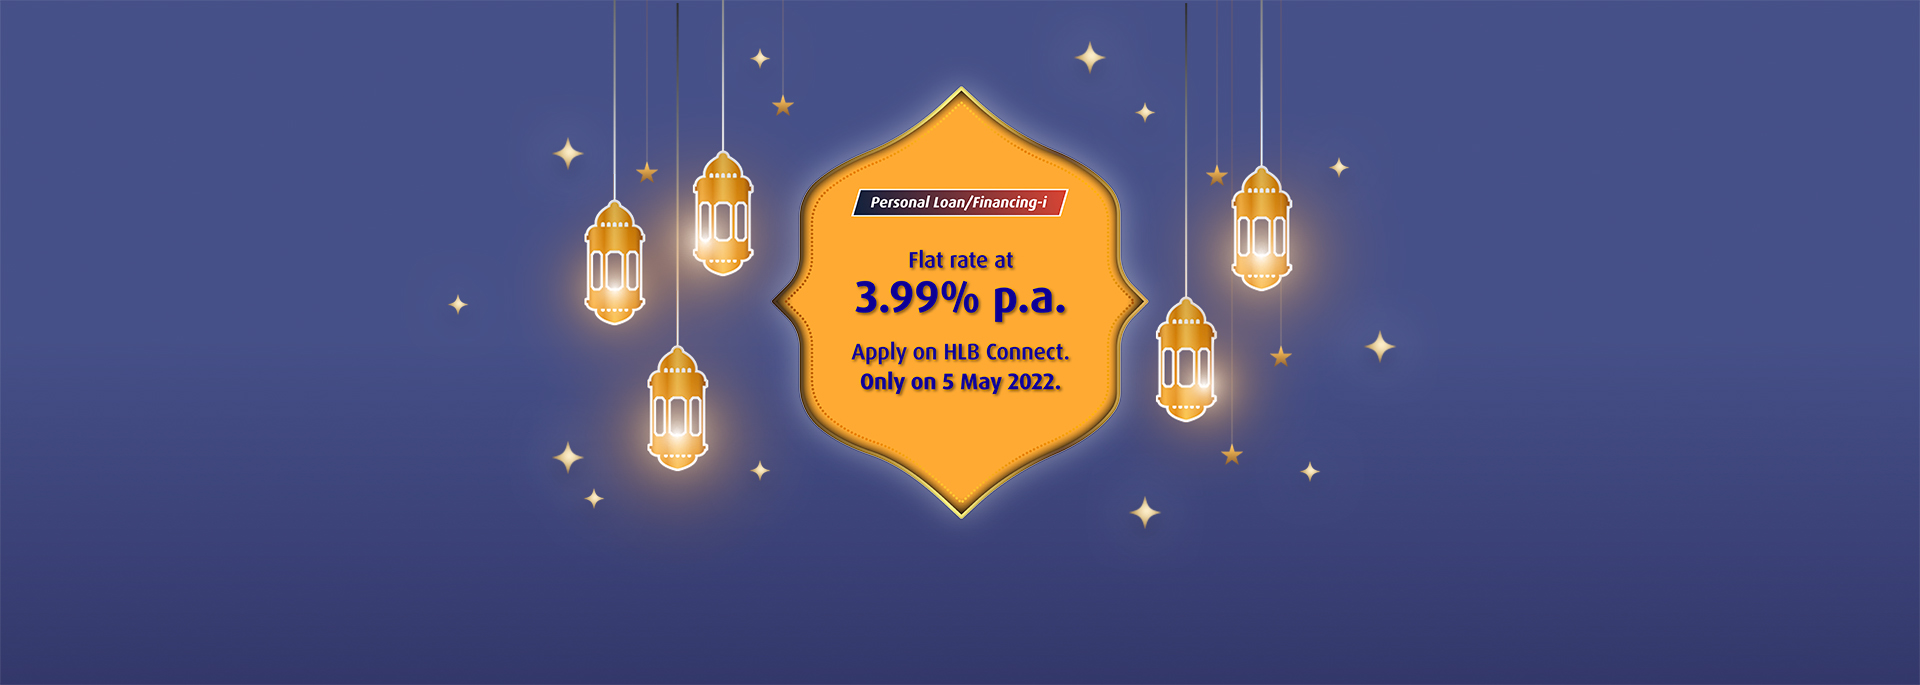 Enjoy flat rate at 3.99% p.a. when you apply for a Personal Loan/Financing-i on HLB Connect